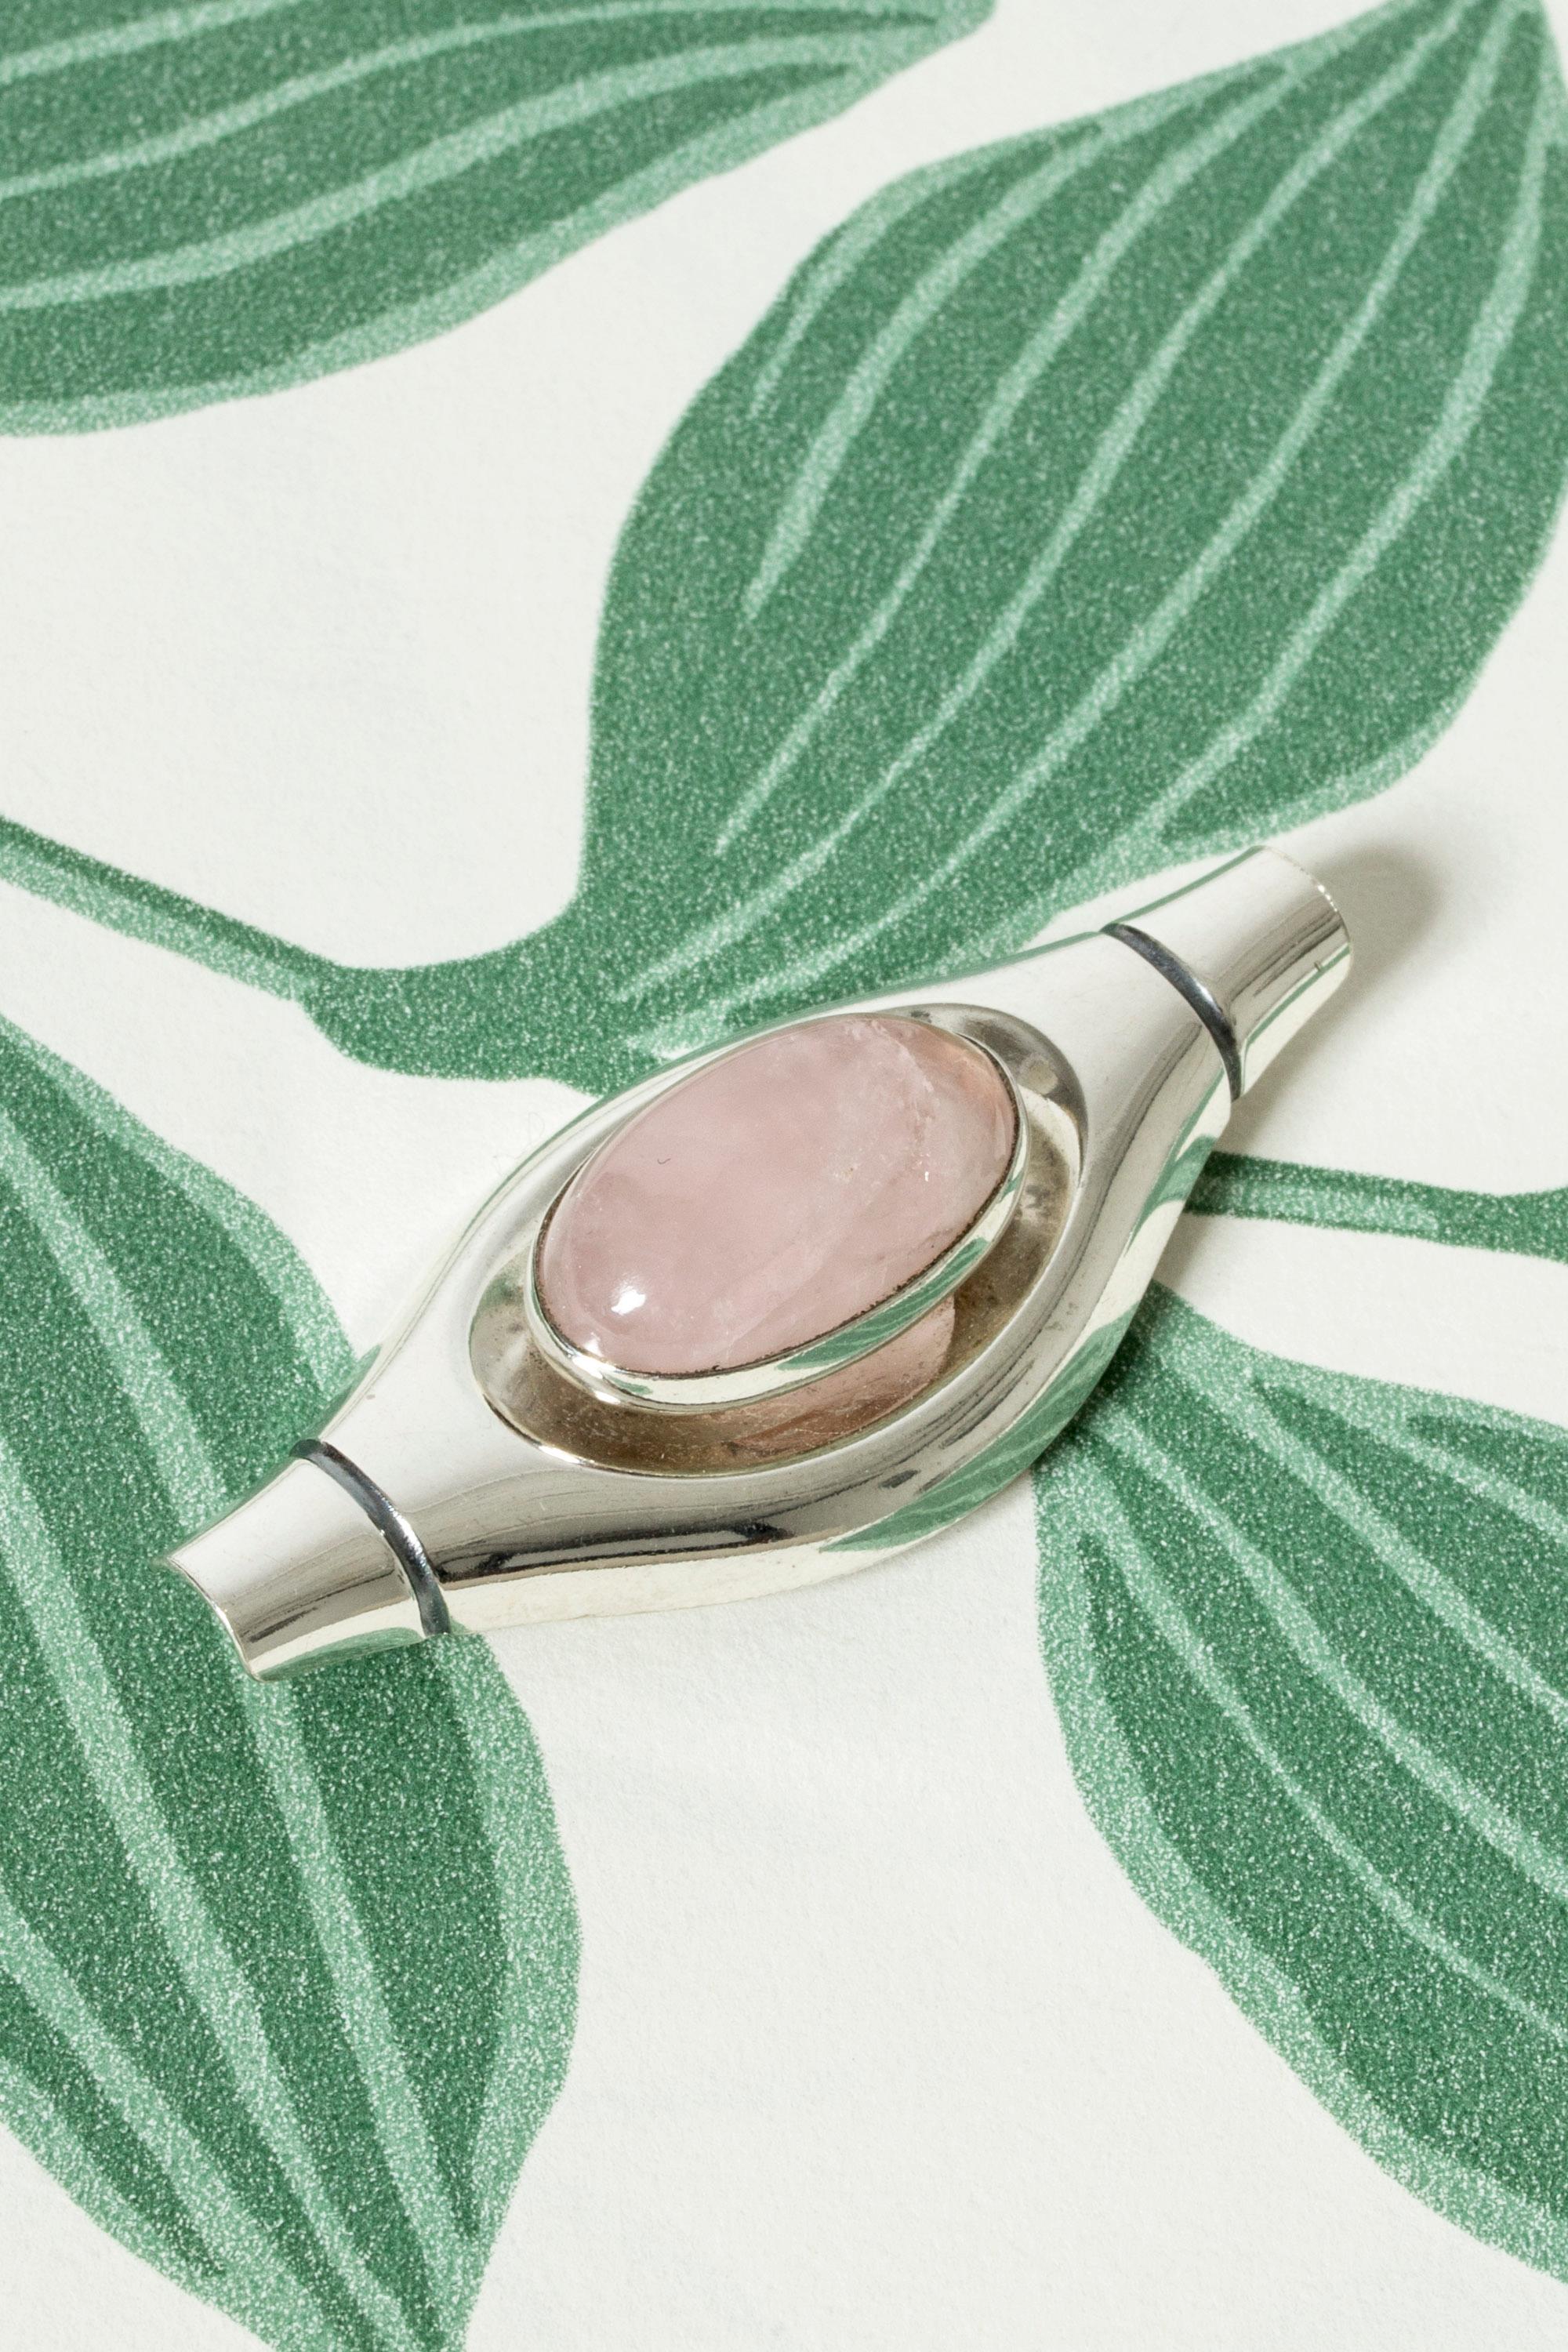 Lovely silver brooch by Elis Kauppi, in an appealing imaginative form with an oval rose quartz stone in the center. Beautiful, crisp pink color.